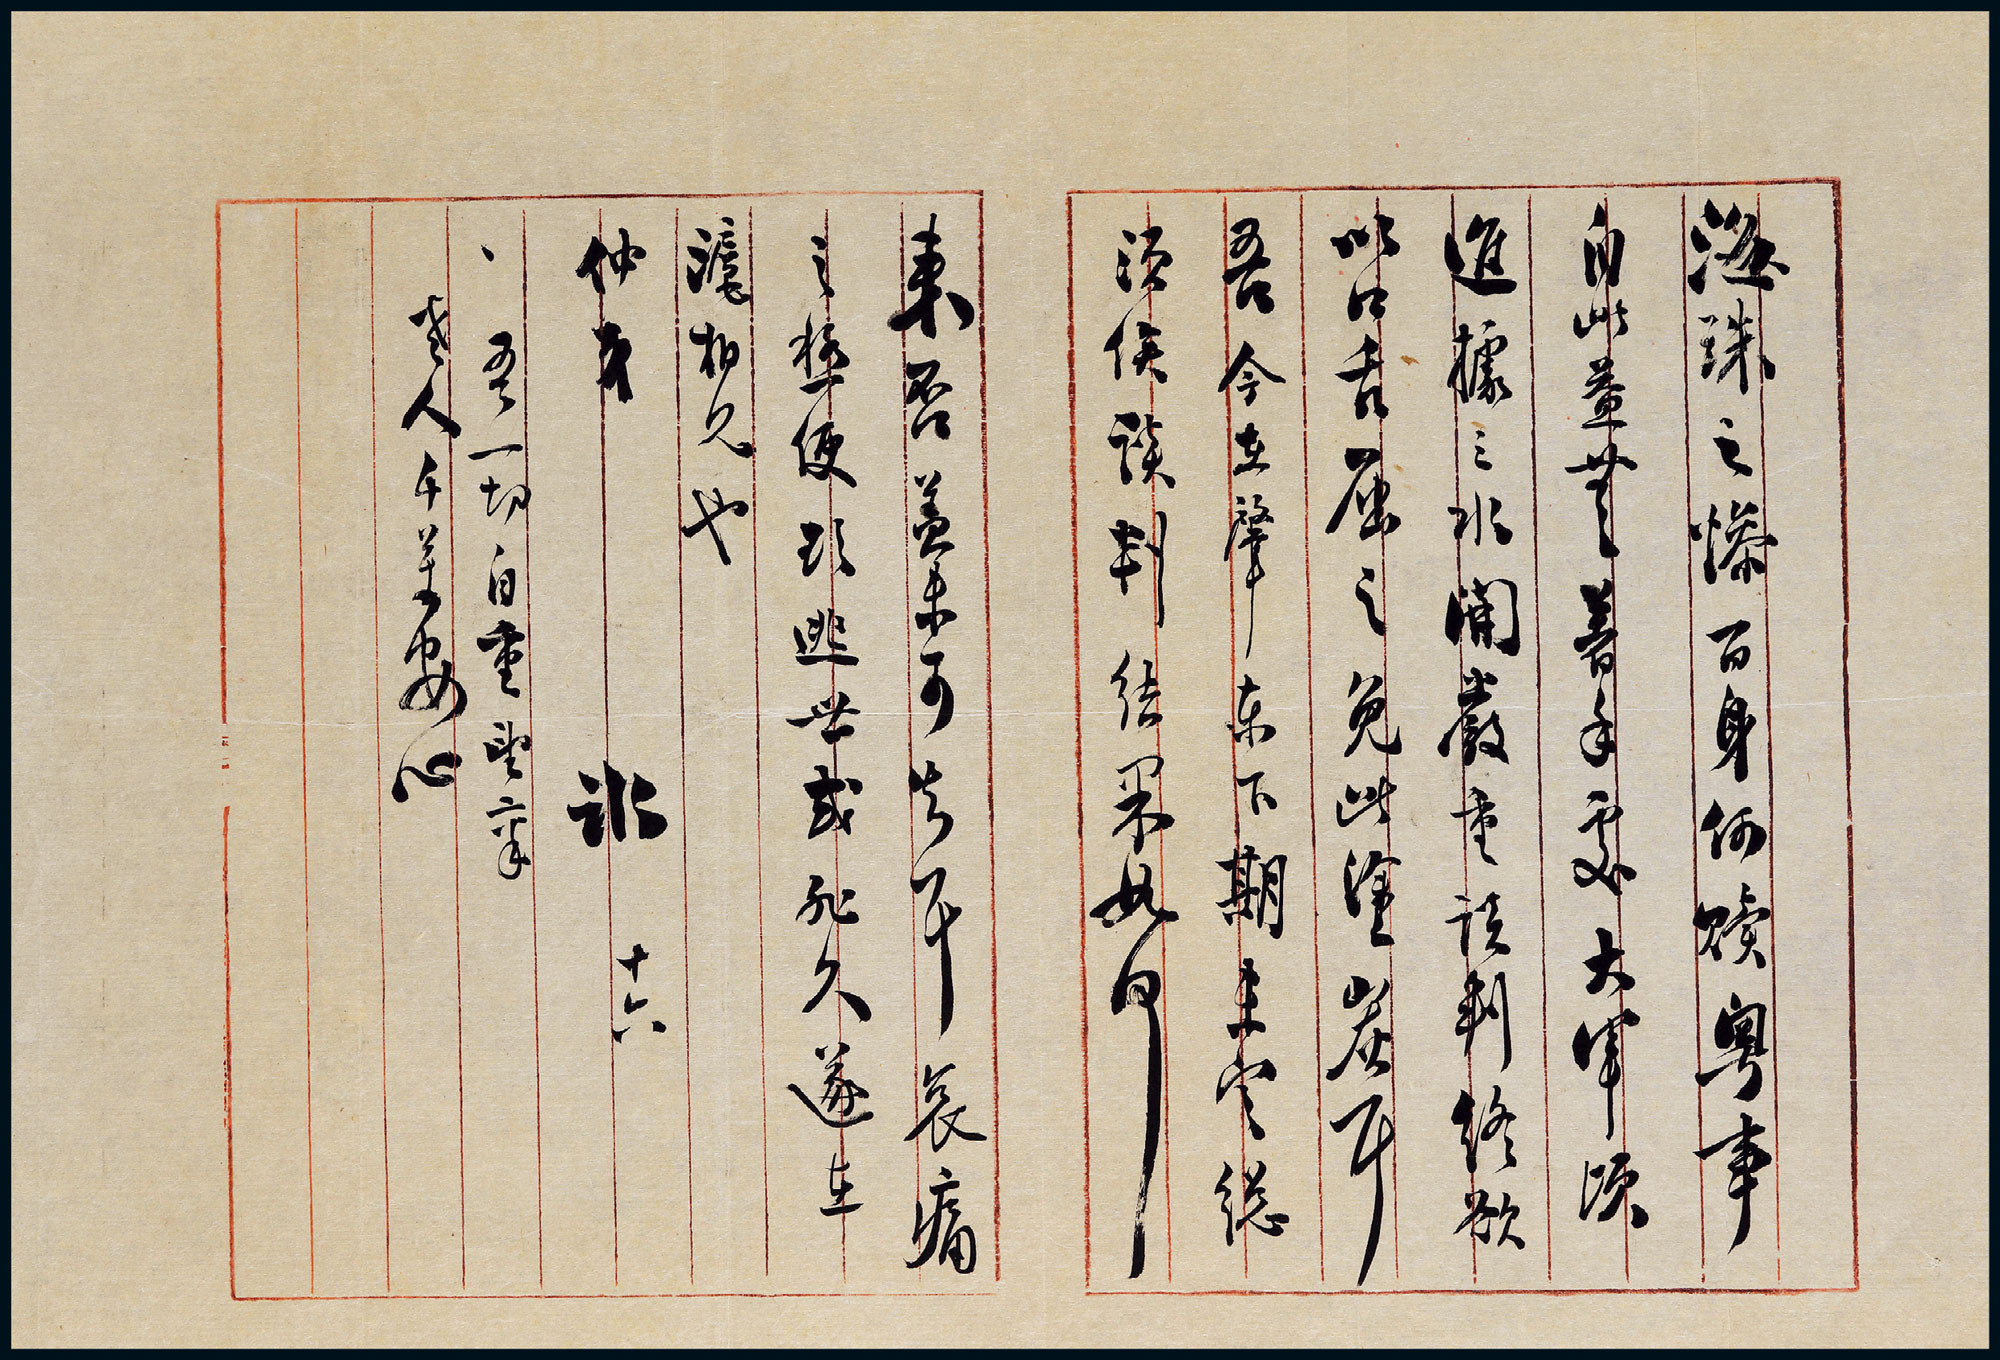 A letter from Liang Qichao to his younger brother Liang Qixun